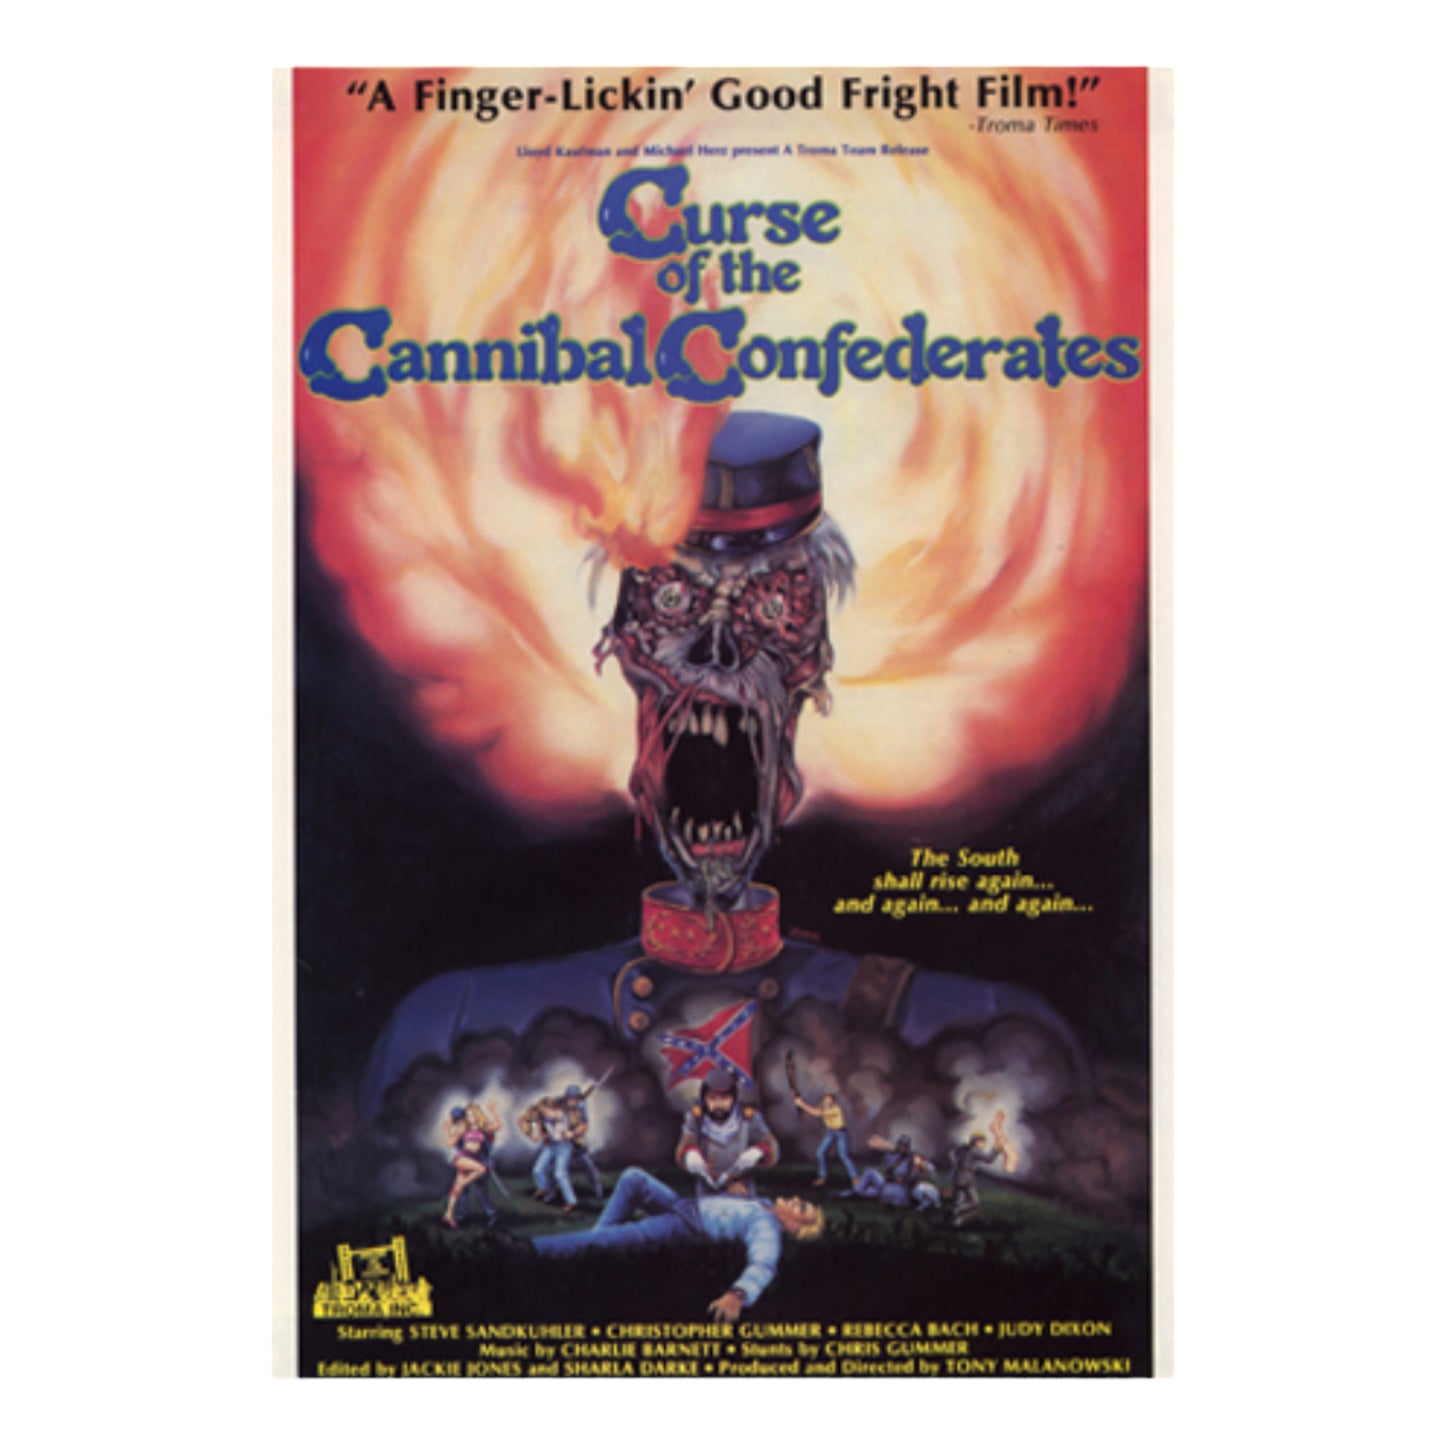 1980’s Curse of the Cannibal Confederates movie poster